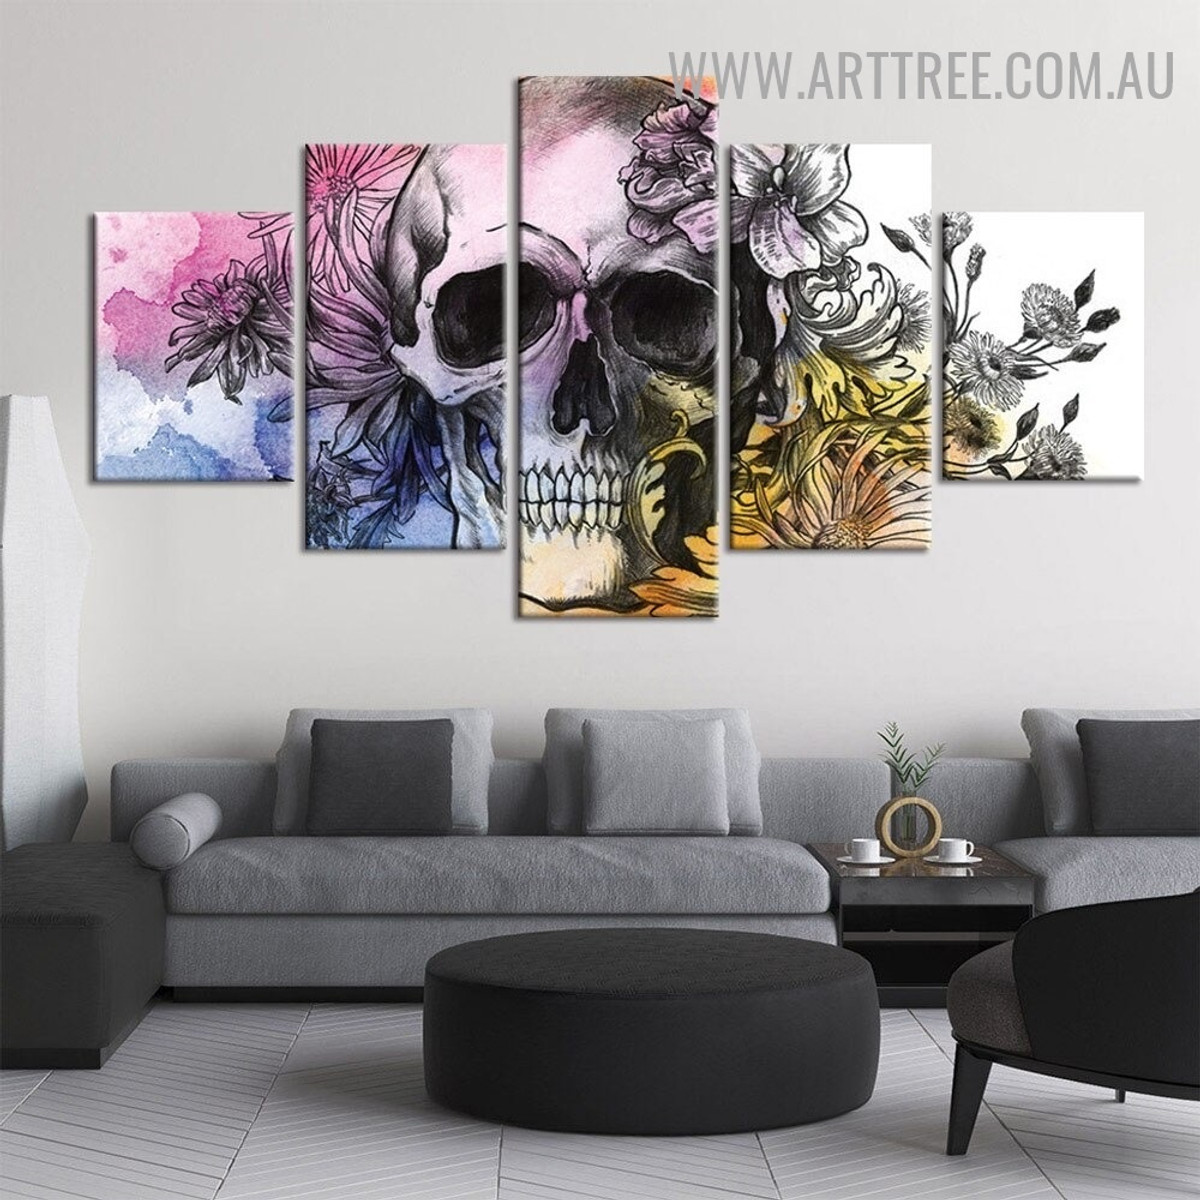 Scalp Spots Modern 5 Piece Multi Panel Image Canvas Abstract Floral Painting Print for Room Wall Garnish